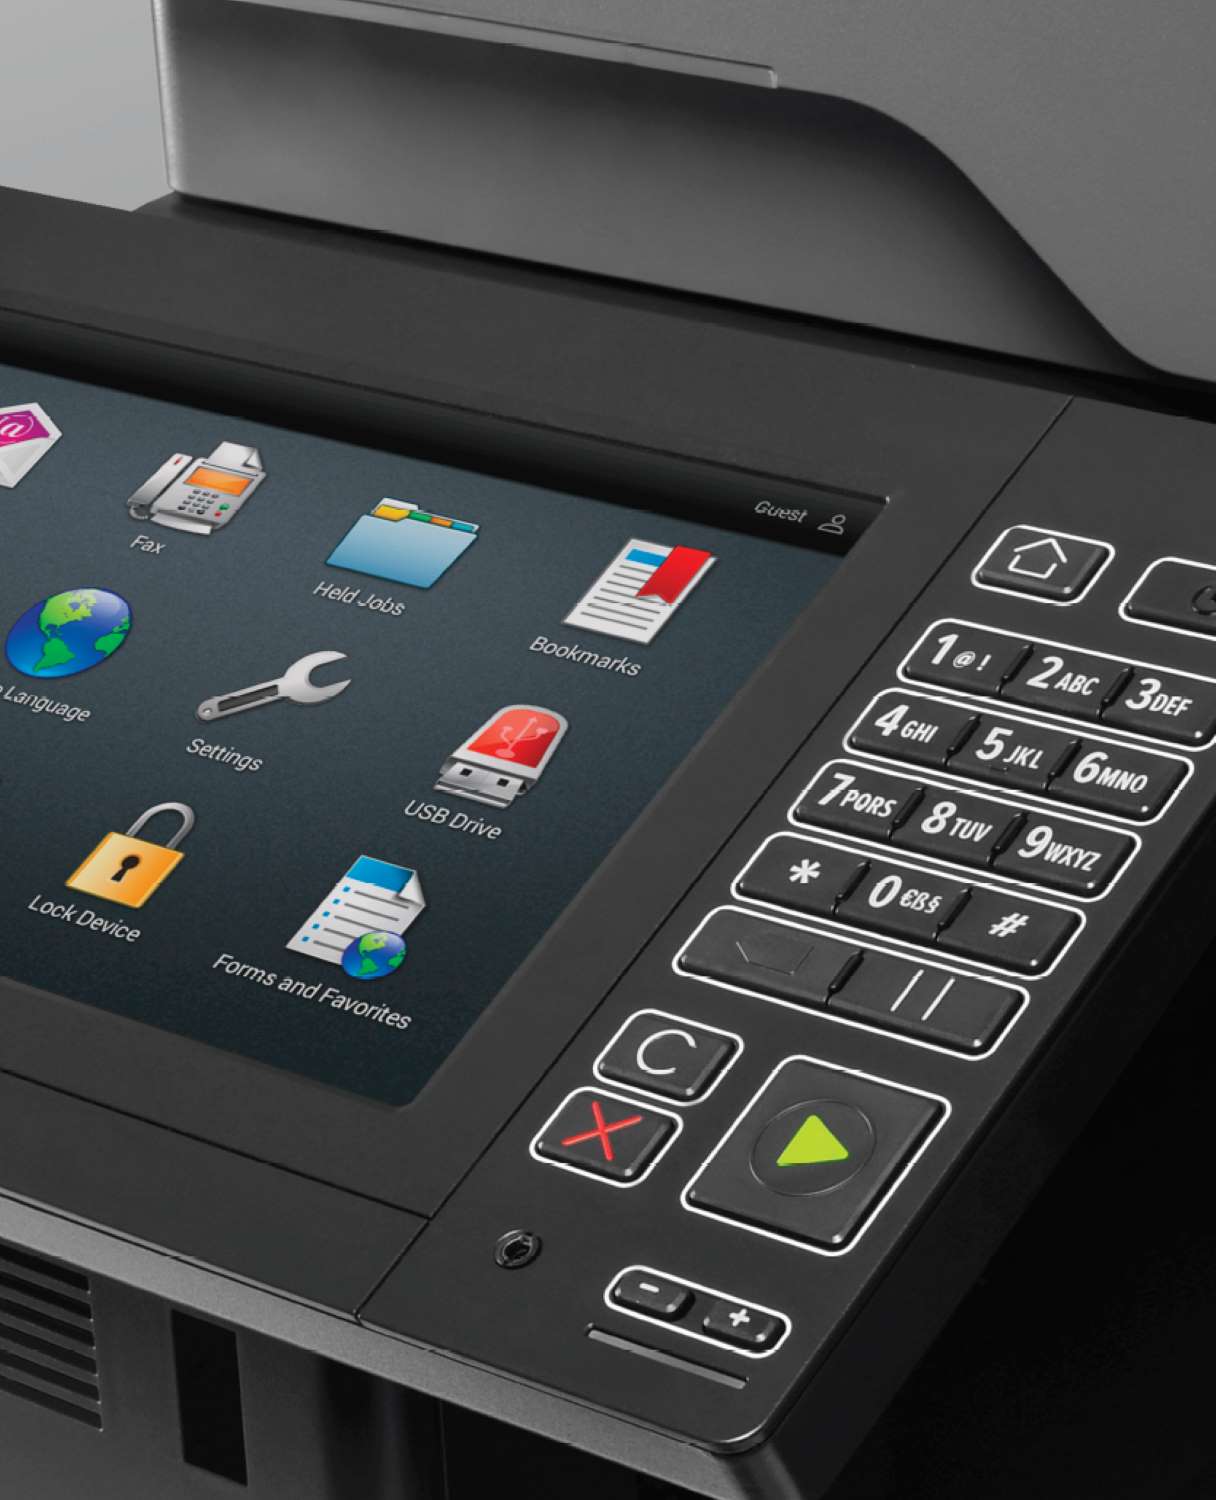 Tech4 Office Equipment in Carlisle, Suppliers of office printers across Cumbria and the Borders